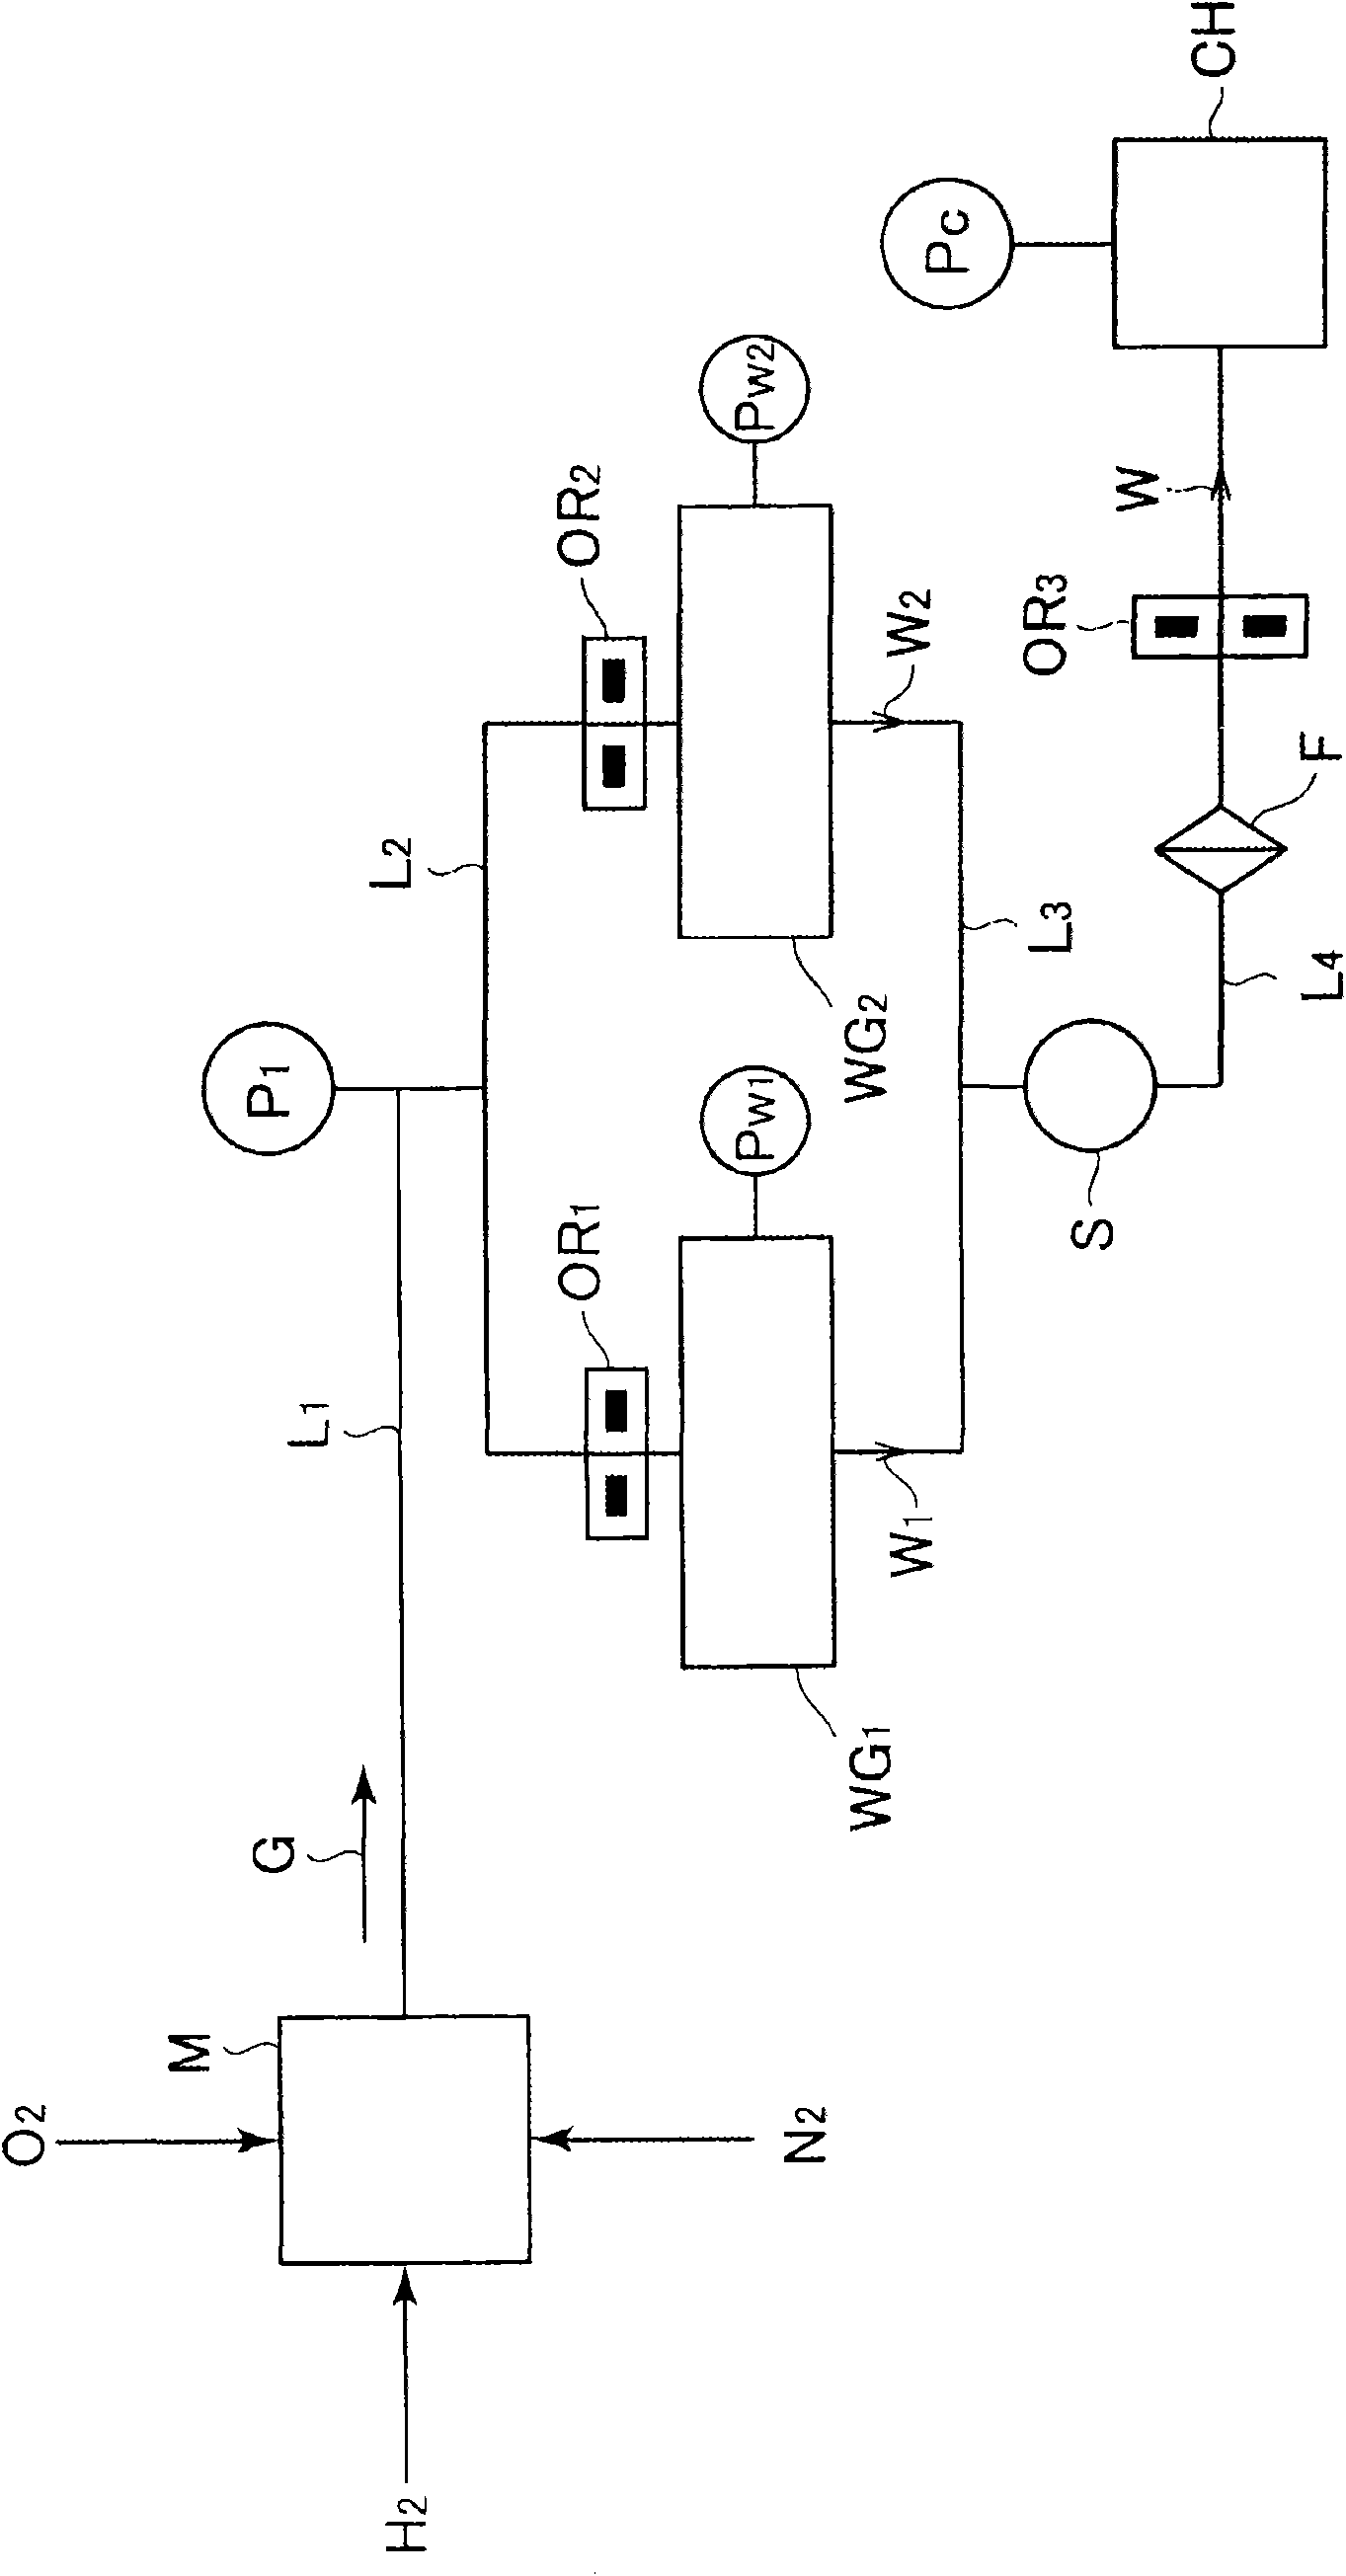 Method of parallel run of reaction furnace for moisture generation